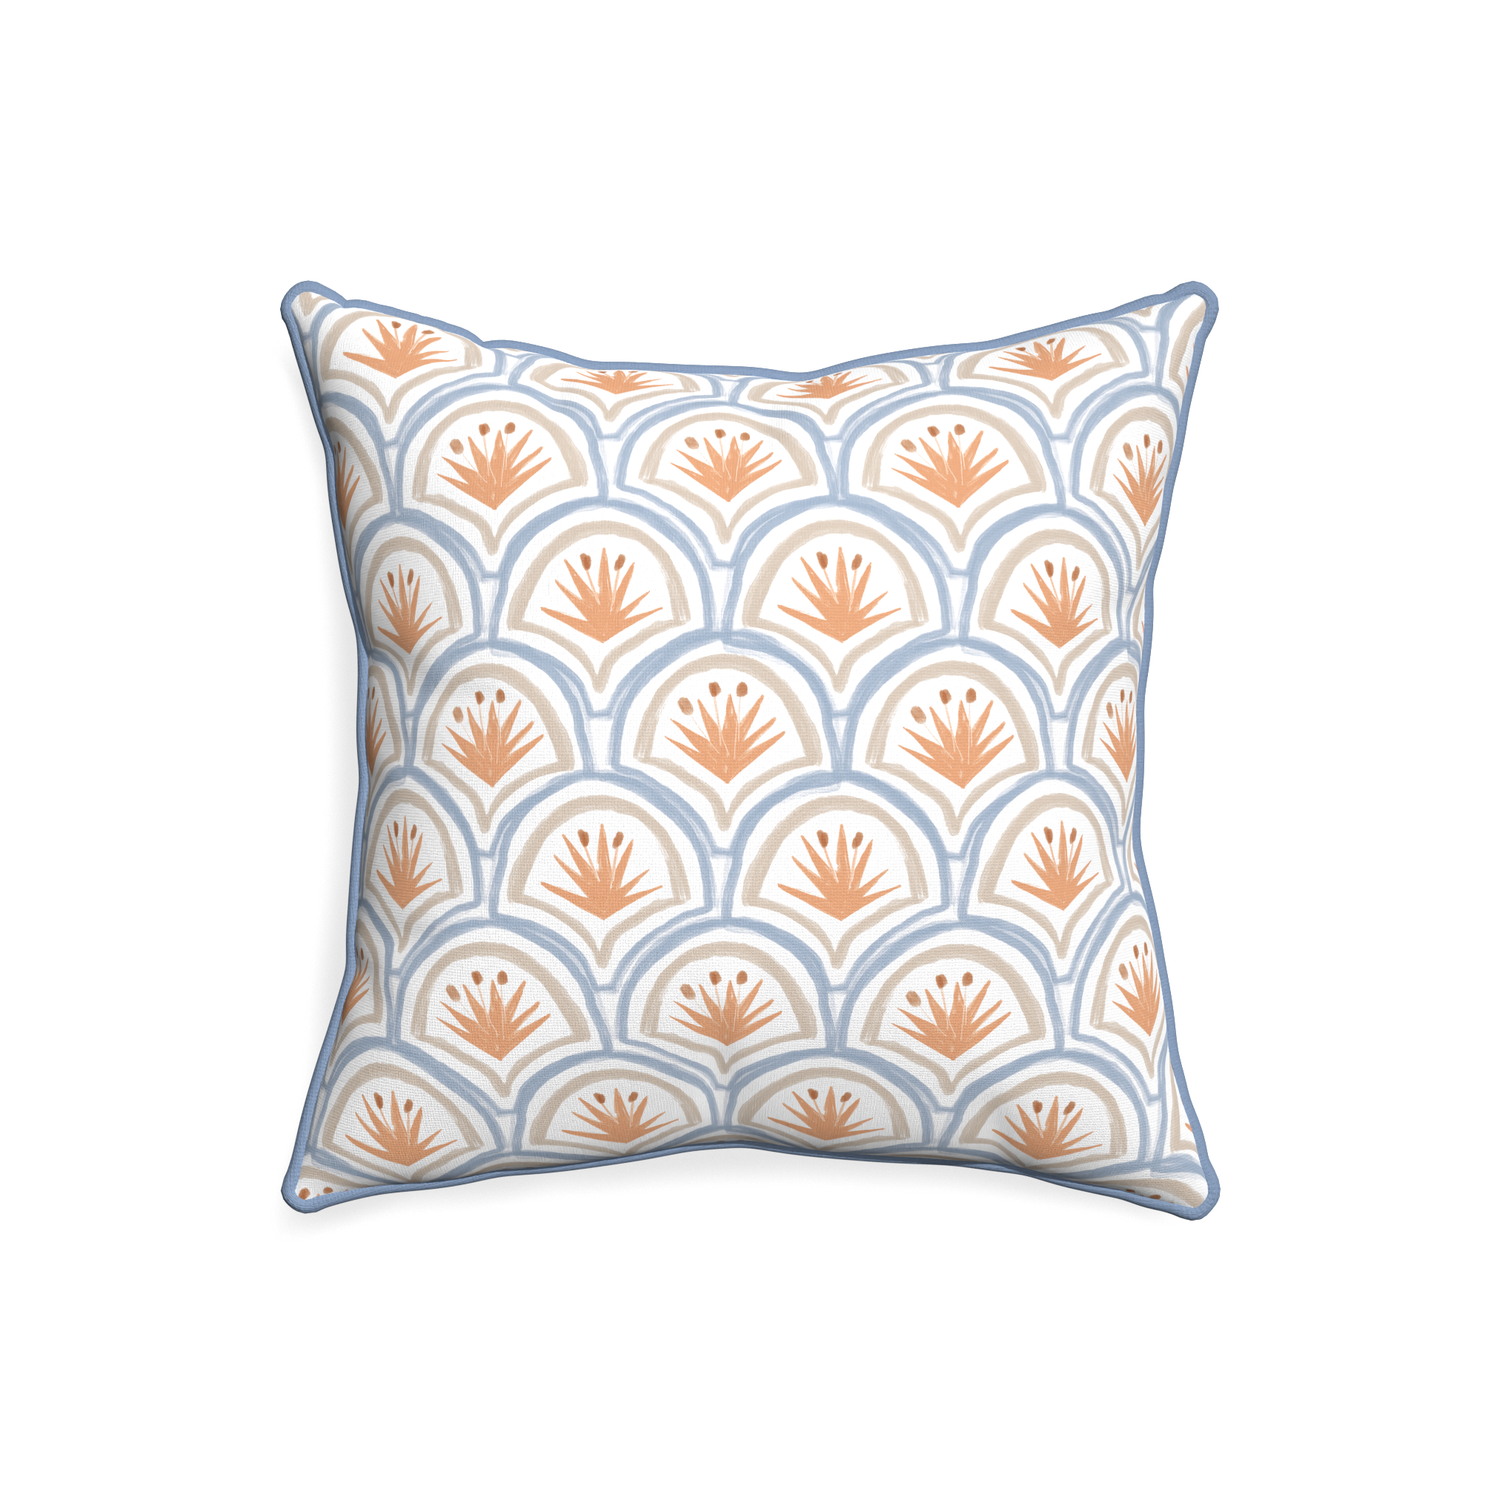 20-square thatcher apricot custom art deco palm patternpillow with sky piping on white background